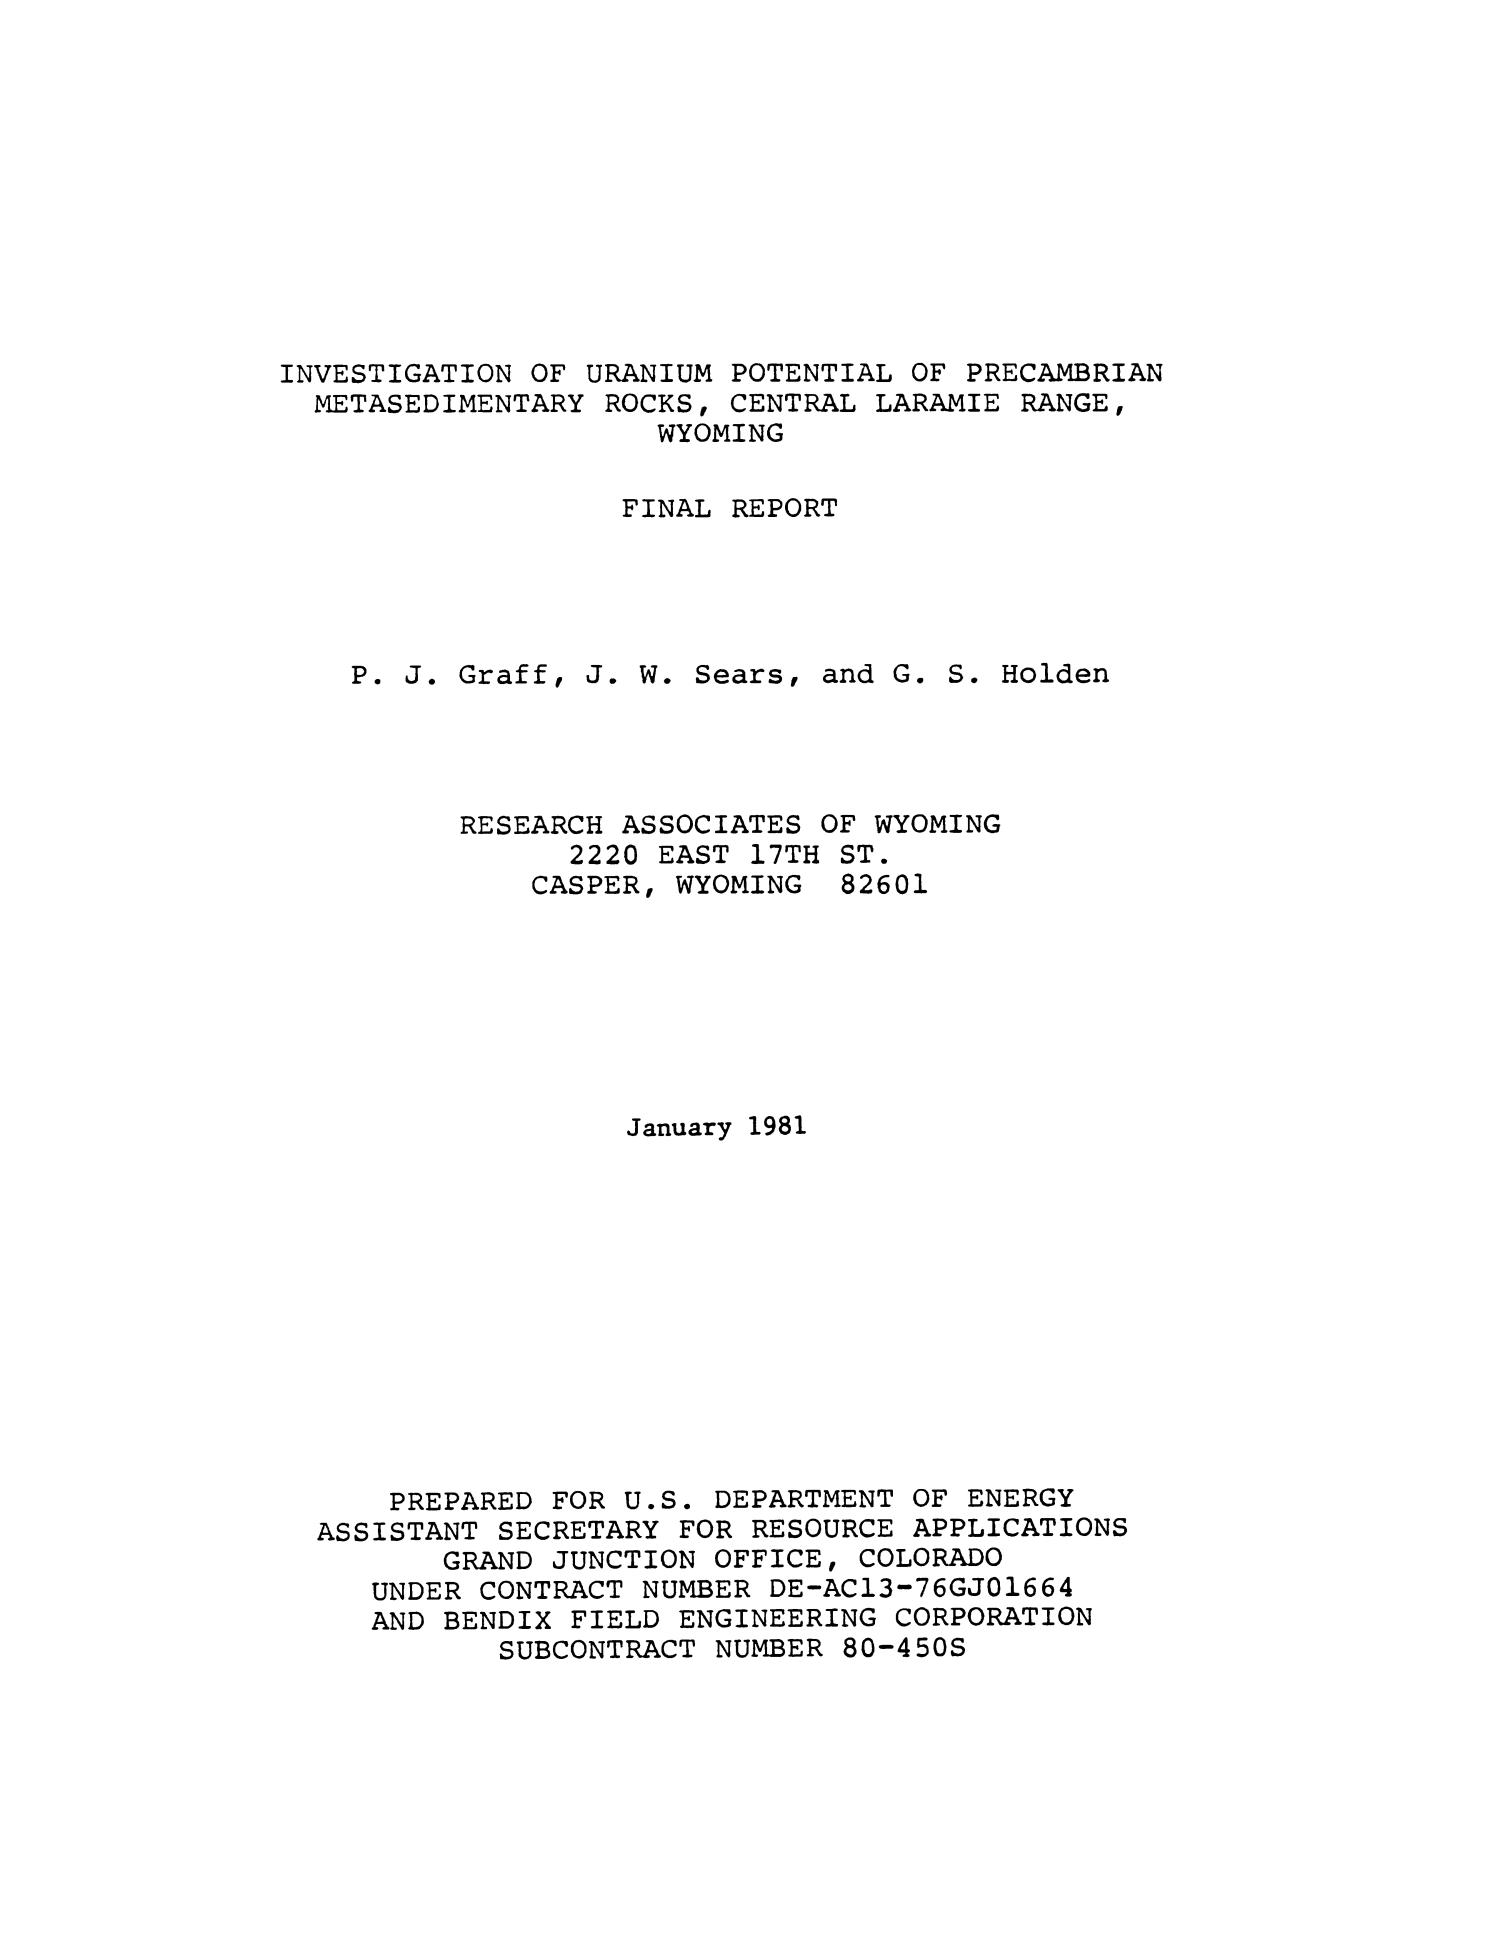 Investigation of Uranium Potential of Precambrian and Metasedimentary Rocks, Central Laramie Range, Wyoming: Final Report
                                                
                                                    Title Page
                                                